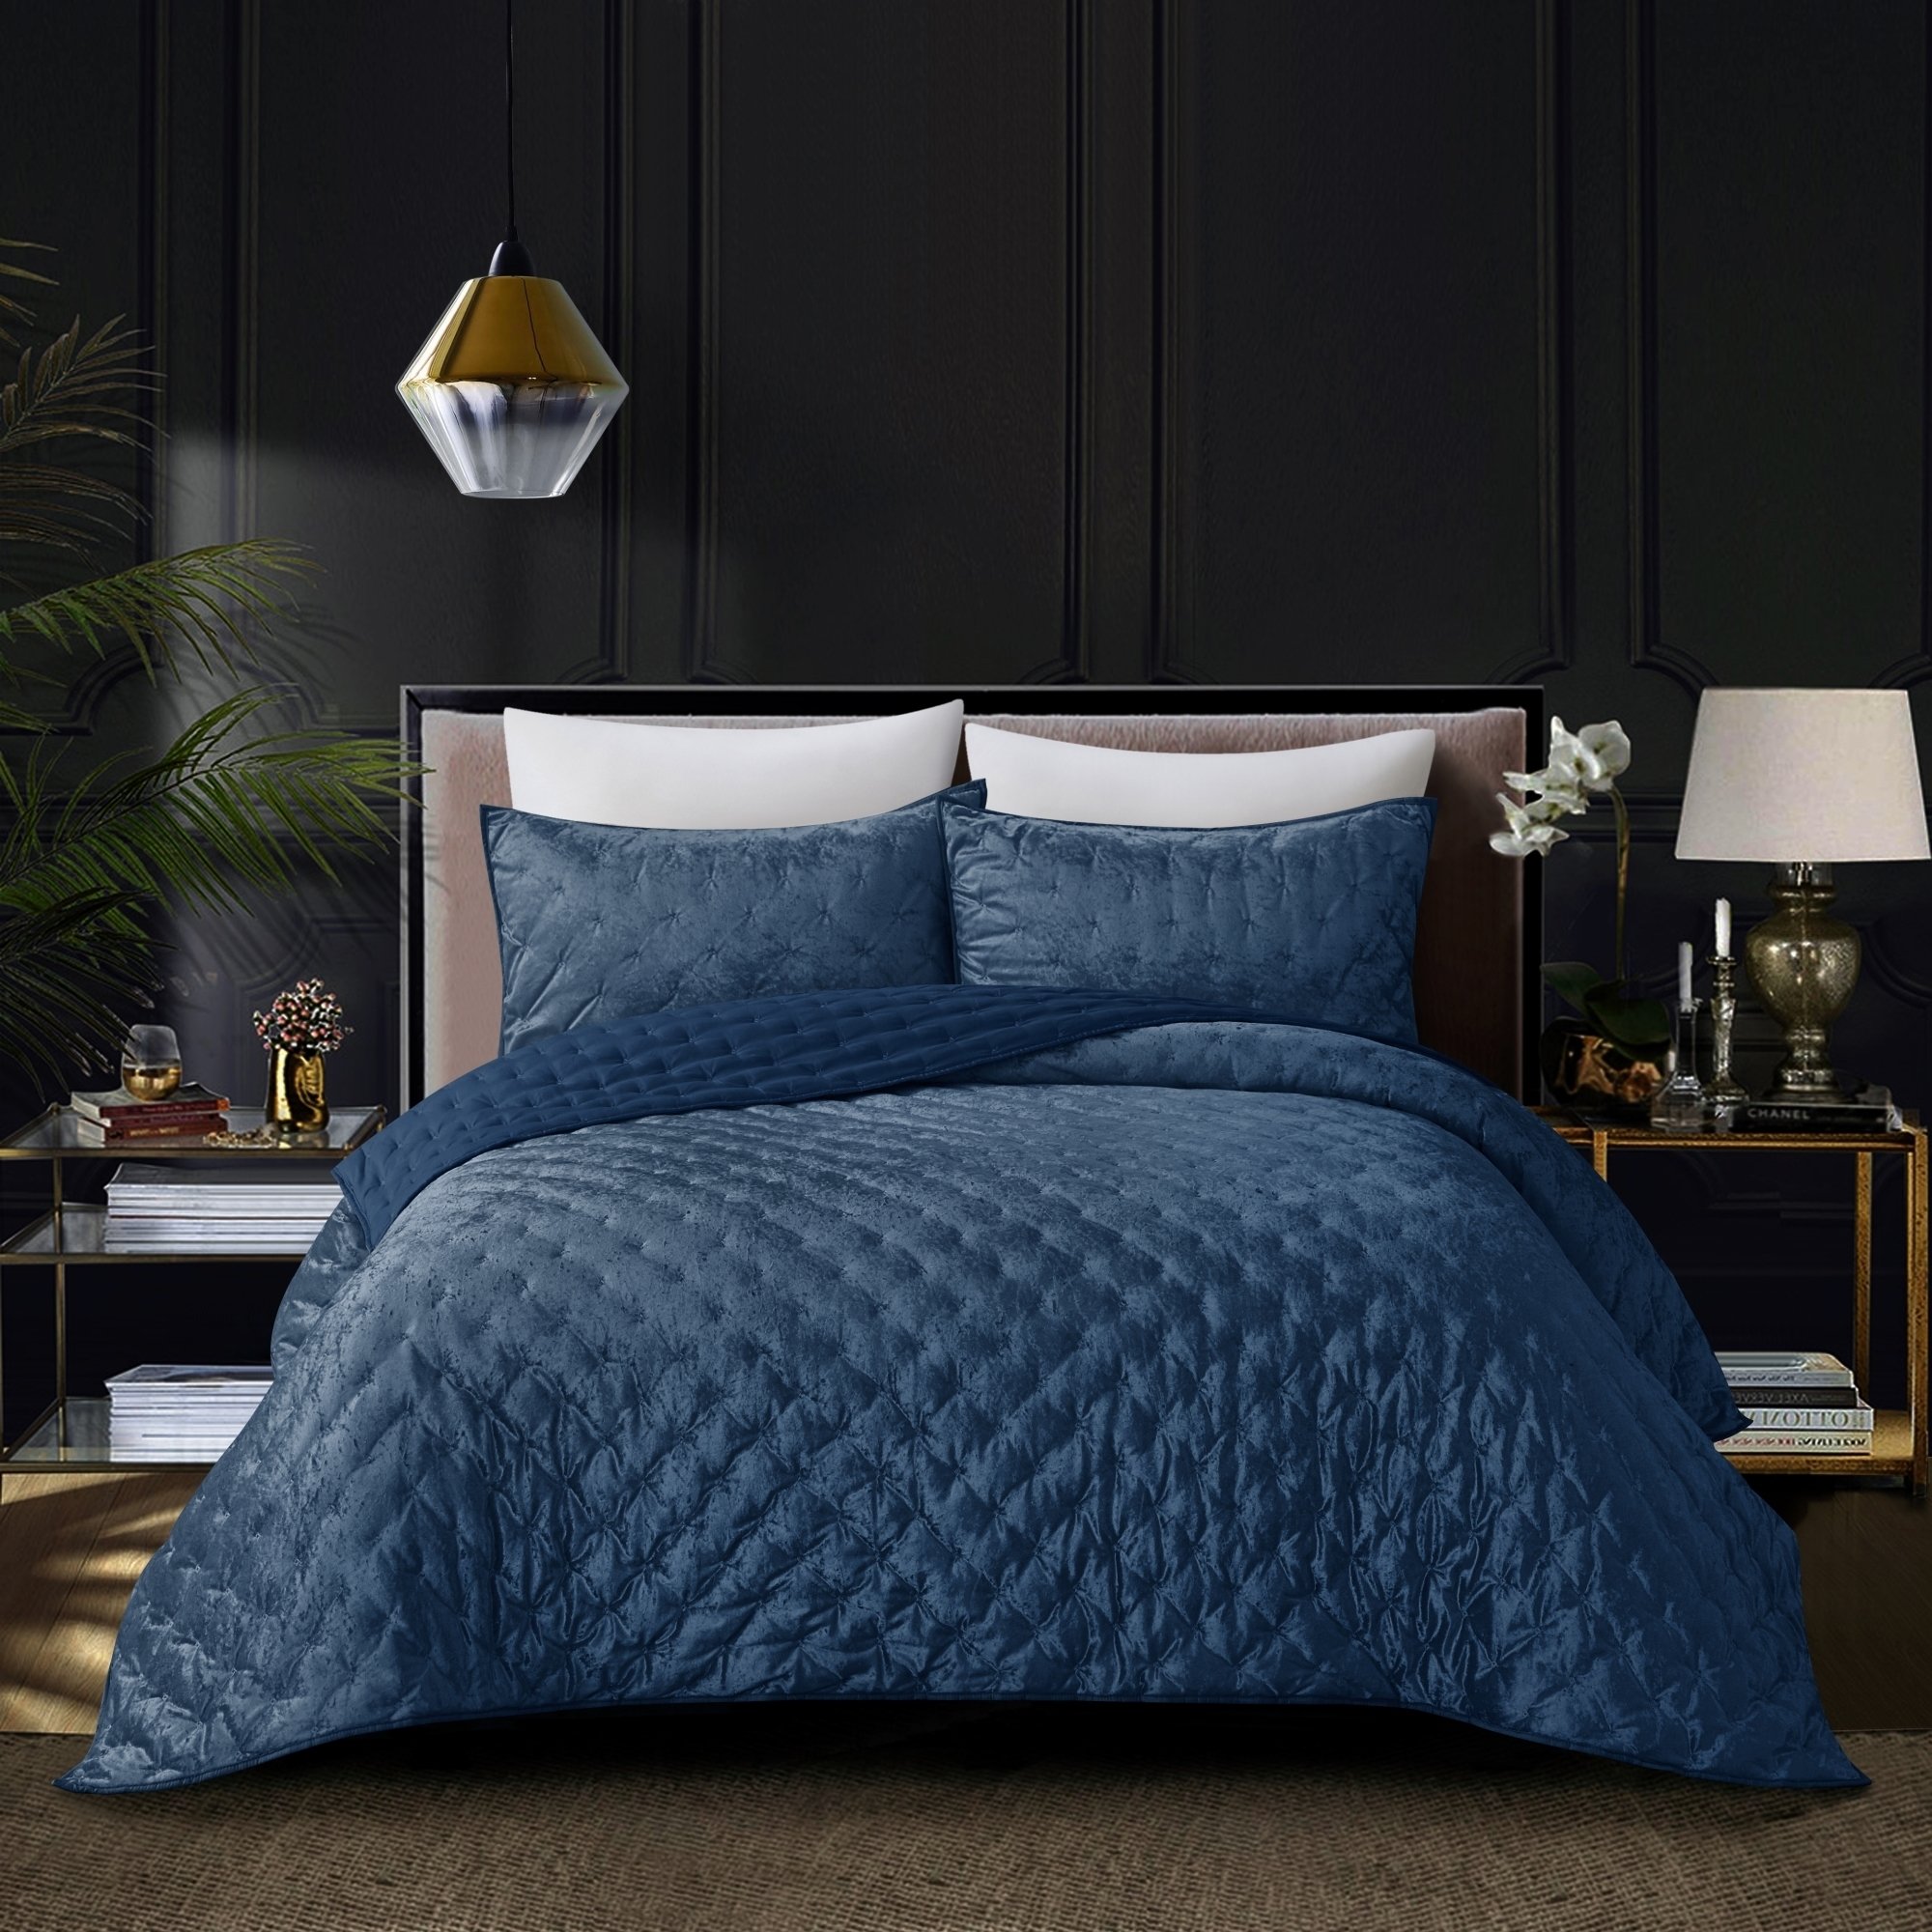 Meagan Comforter Set -Crushed Velvet , Soft And Shiny - Navy, Twin/twin Xl